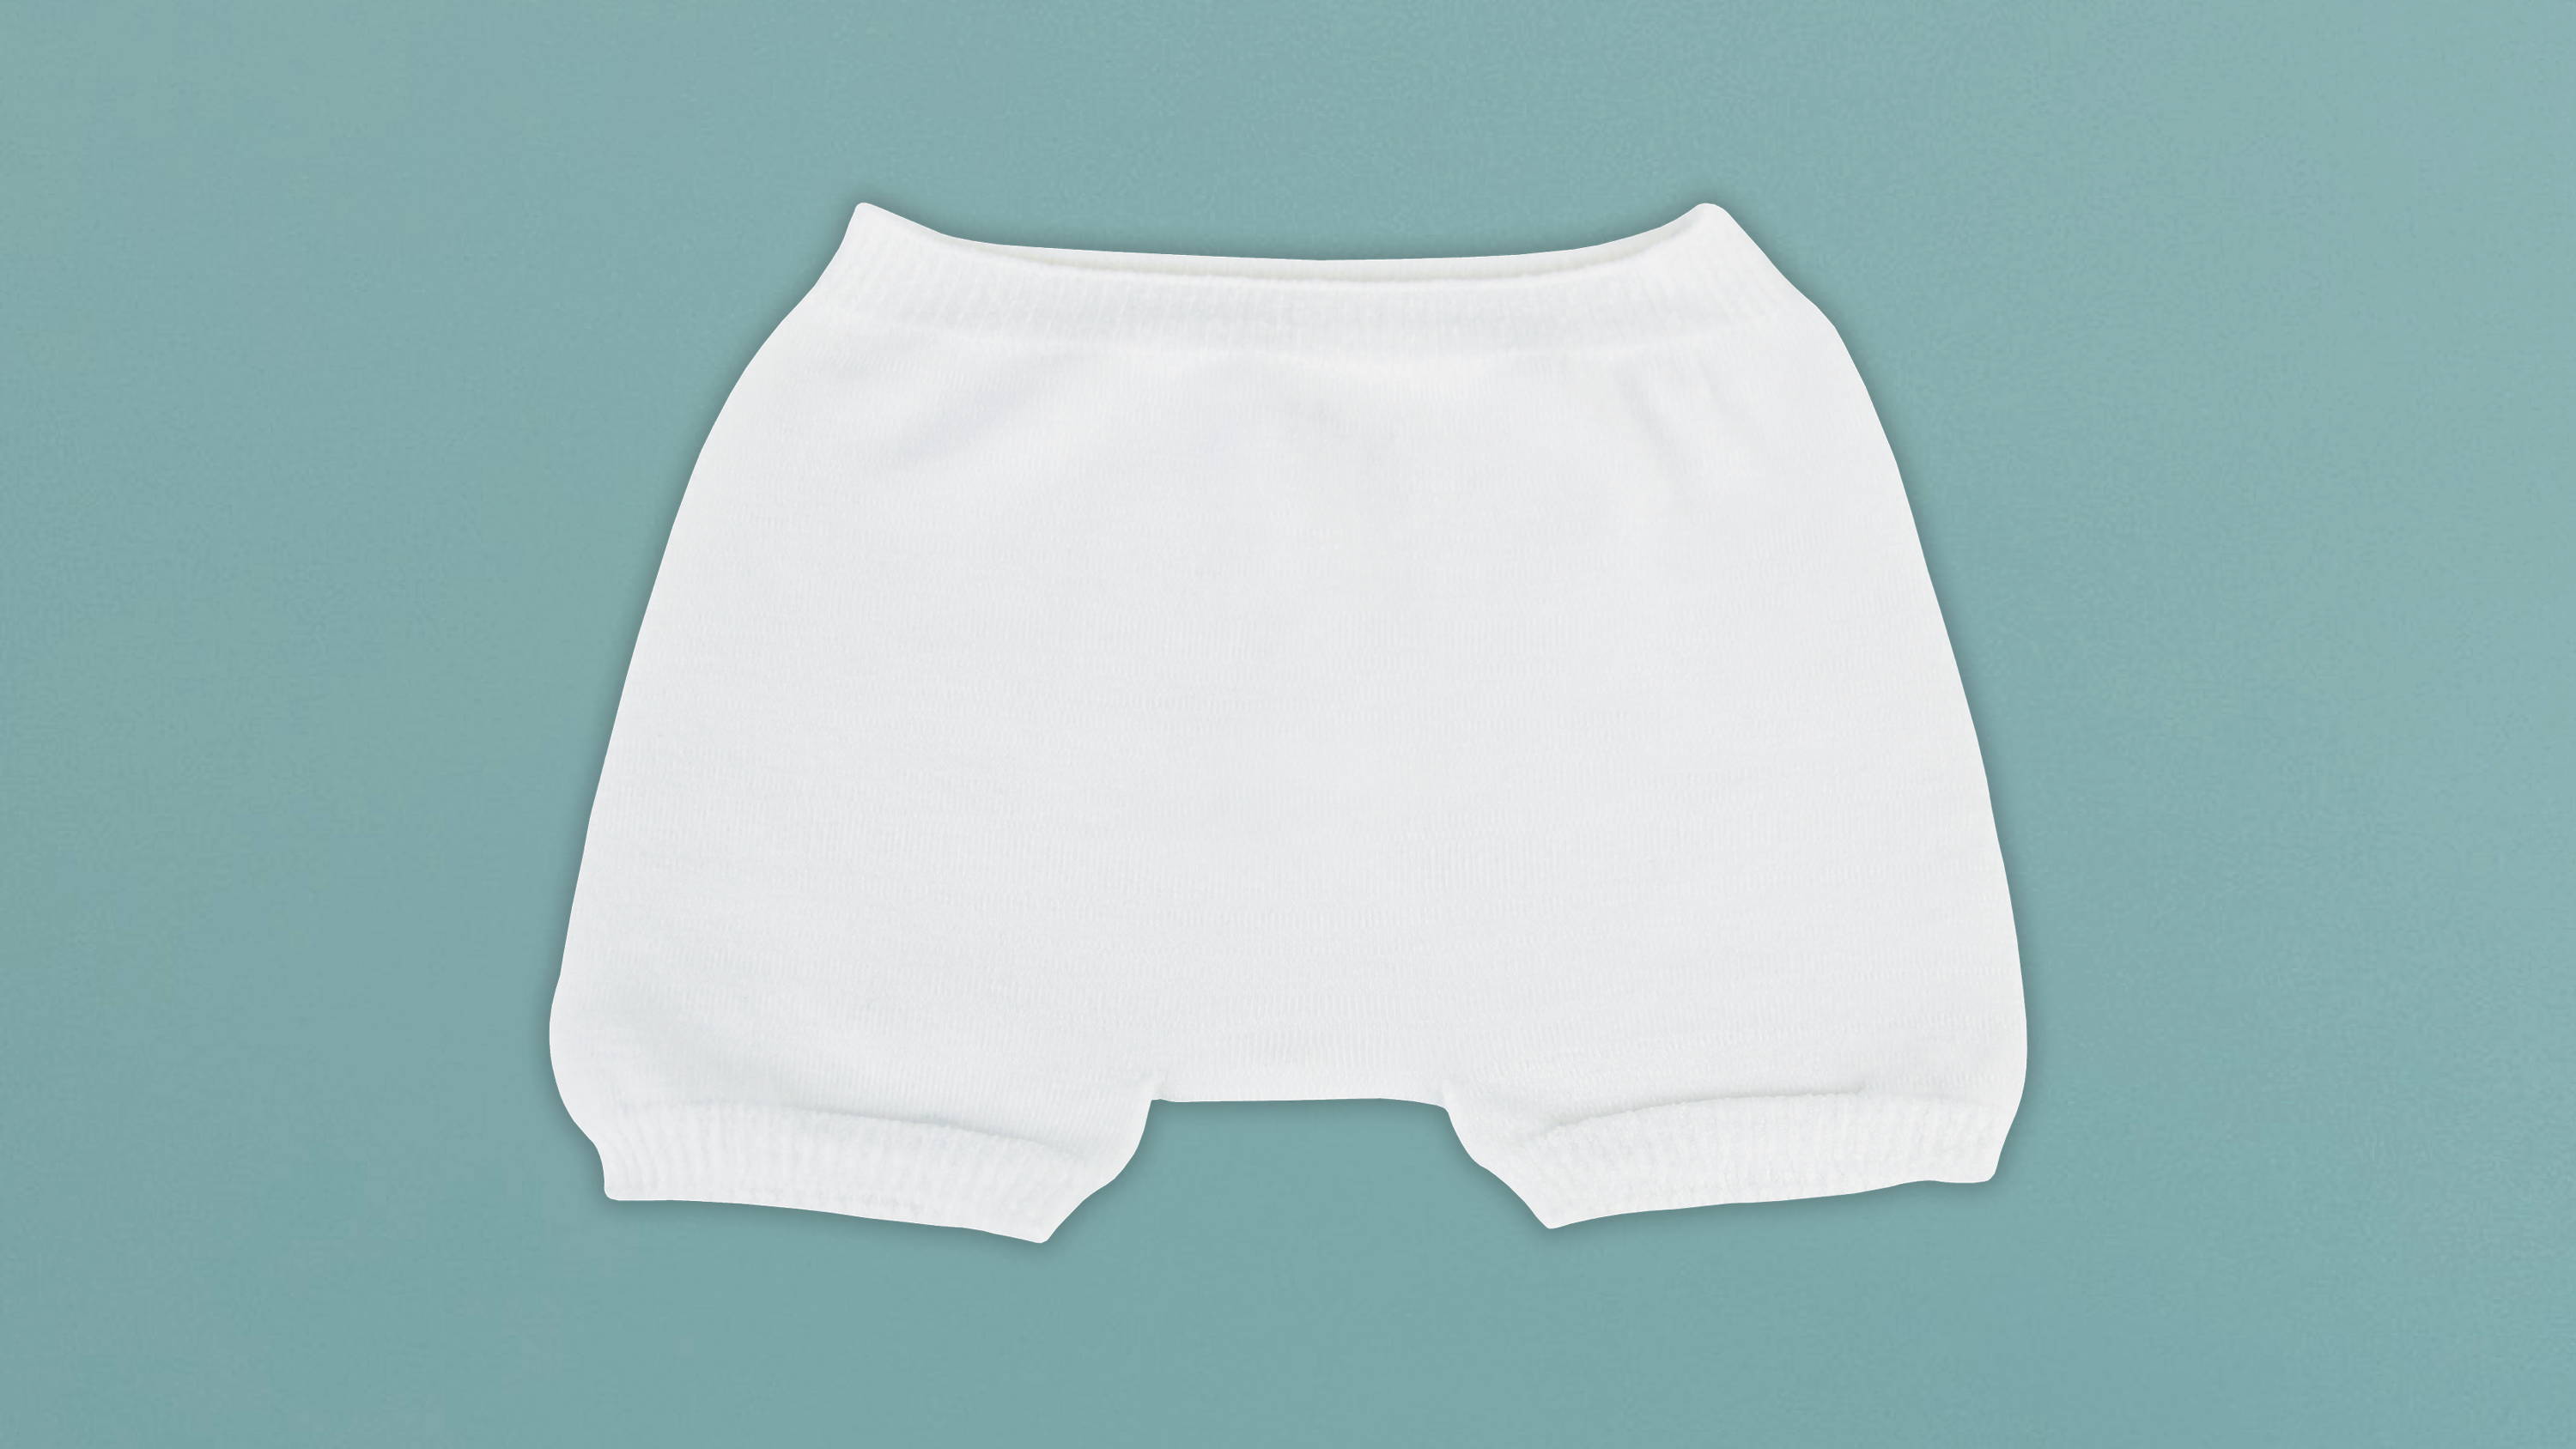 Flat lay of SmartKnitKIDS Seamless Boys' Boxer Briefs